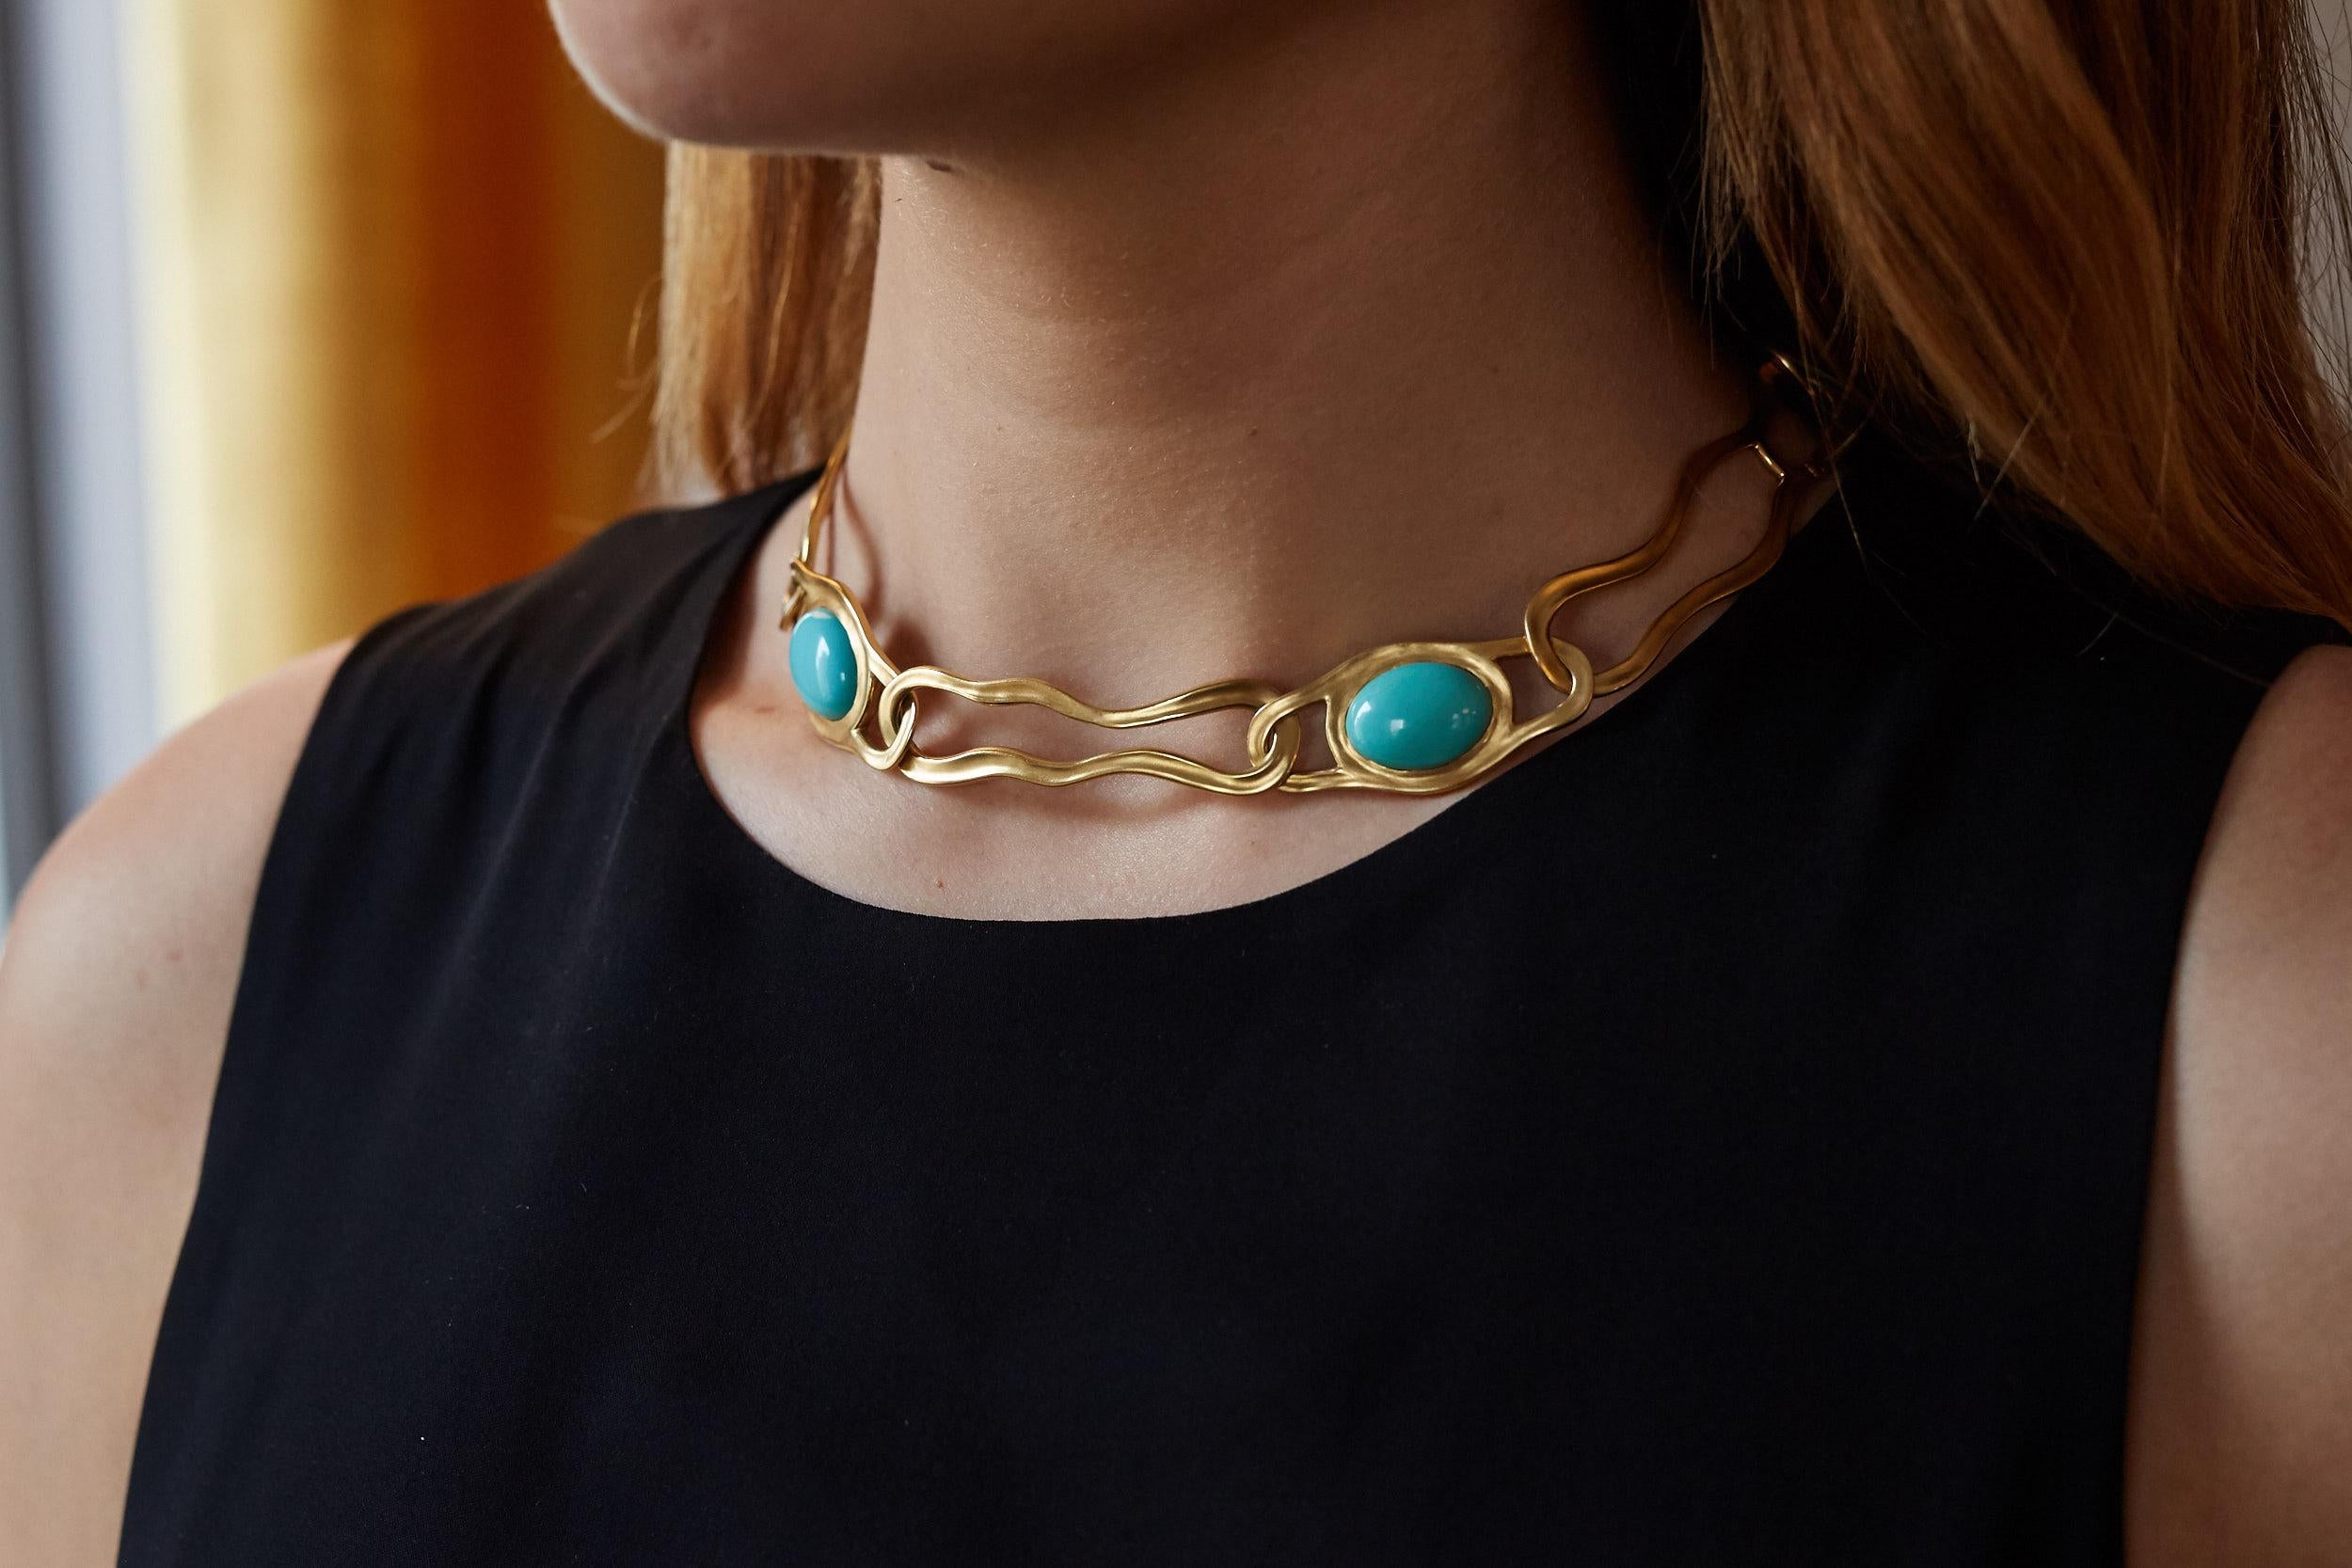 A vintage, 18 karat yellow gold and large cabochon natural Persian turquoise large link necklace, by Angela Cummings for Tiffany & Co., 1982. Signed Tiffany & Co. and Cummings. Stamped 18k and dated 1982. This elegant, modern link necklace sits